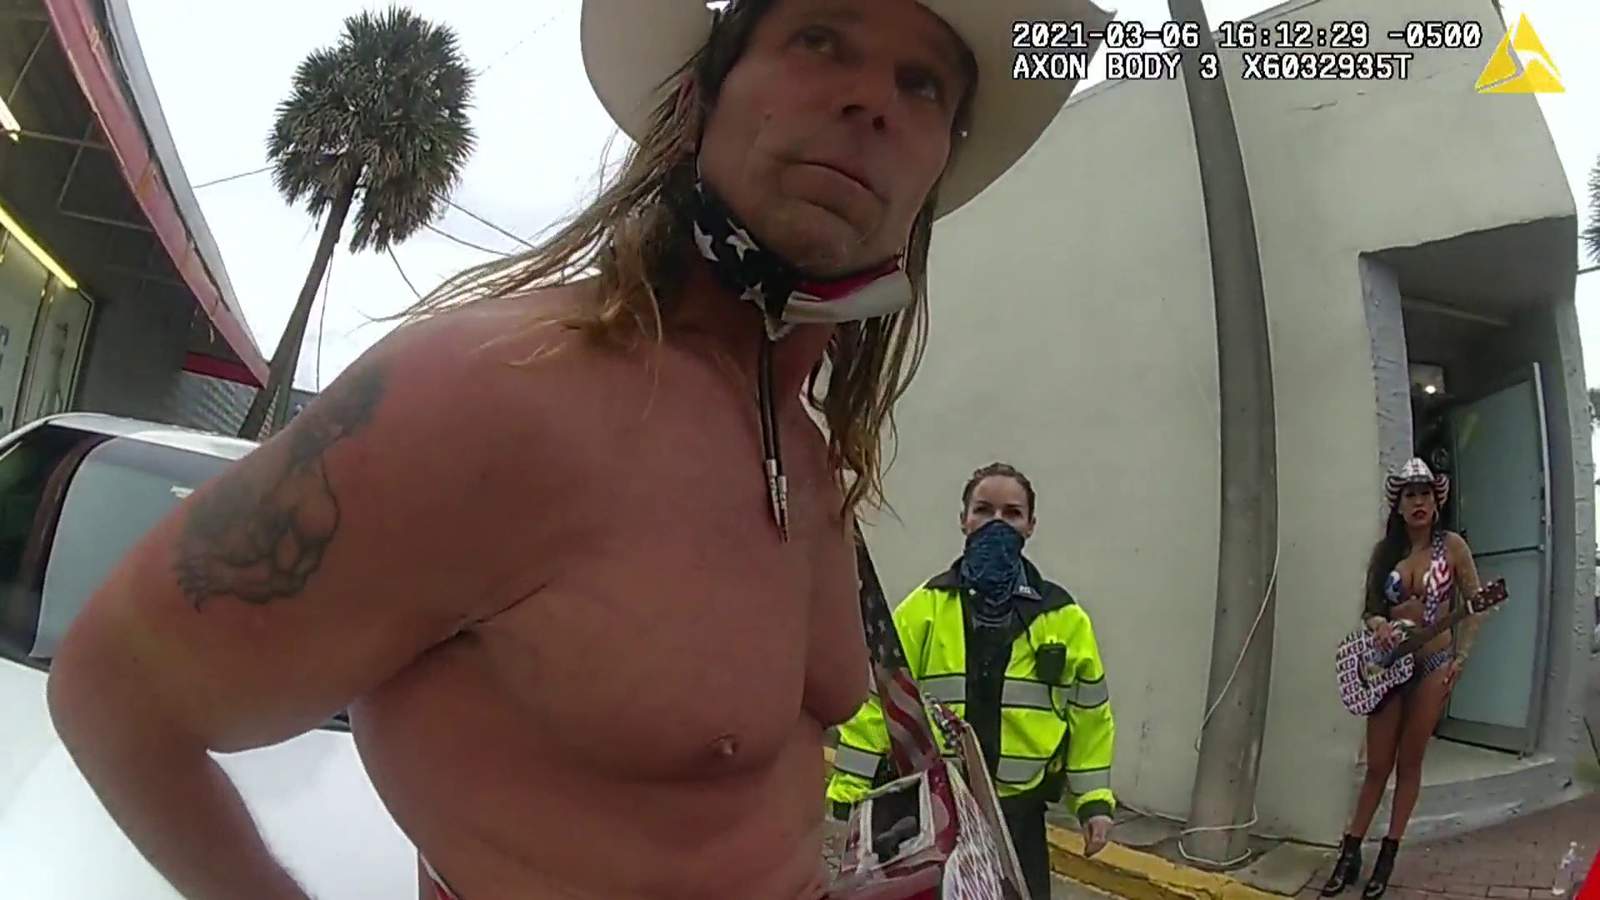 ‘I didn’t do nothing wrong:’ Video shows Naked Cowboy’s guitar being broken during Bike Week arrest